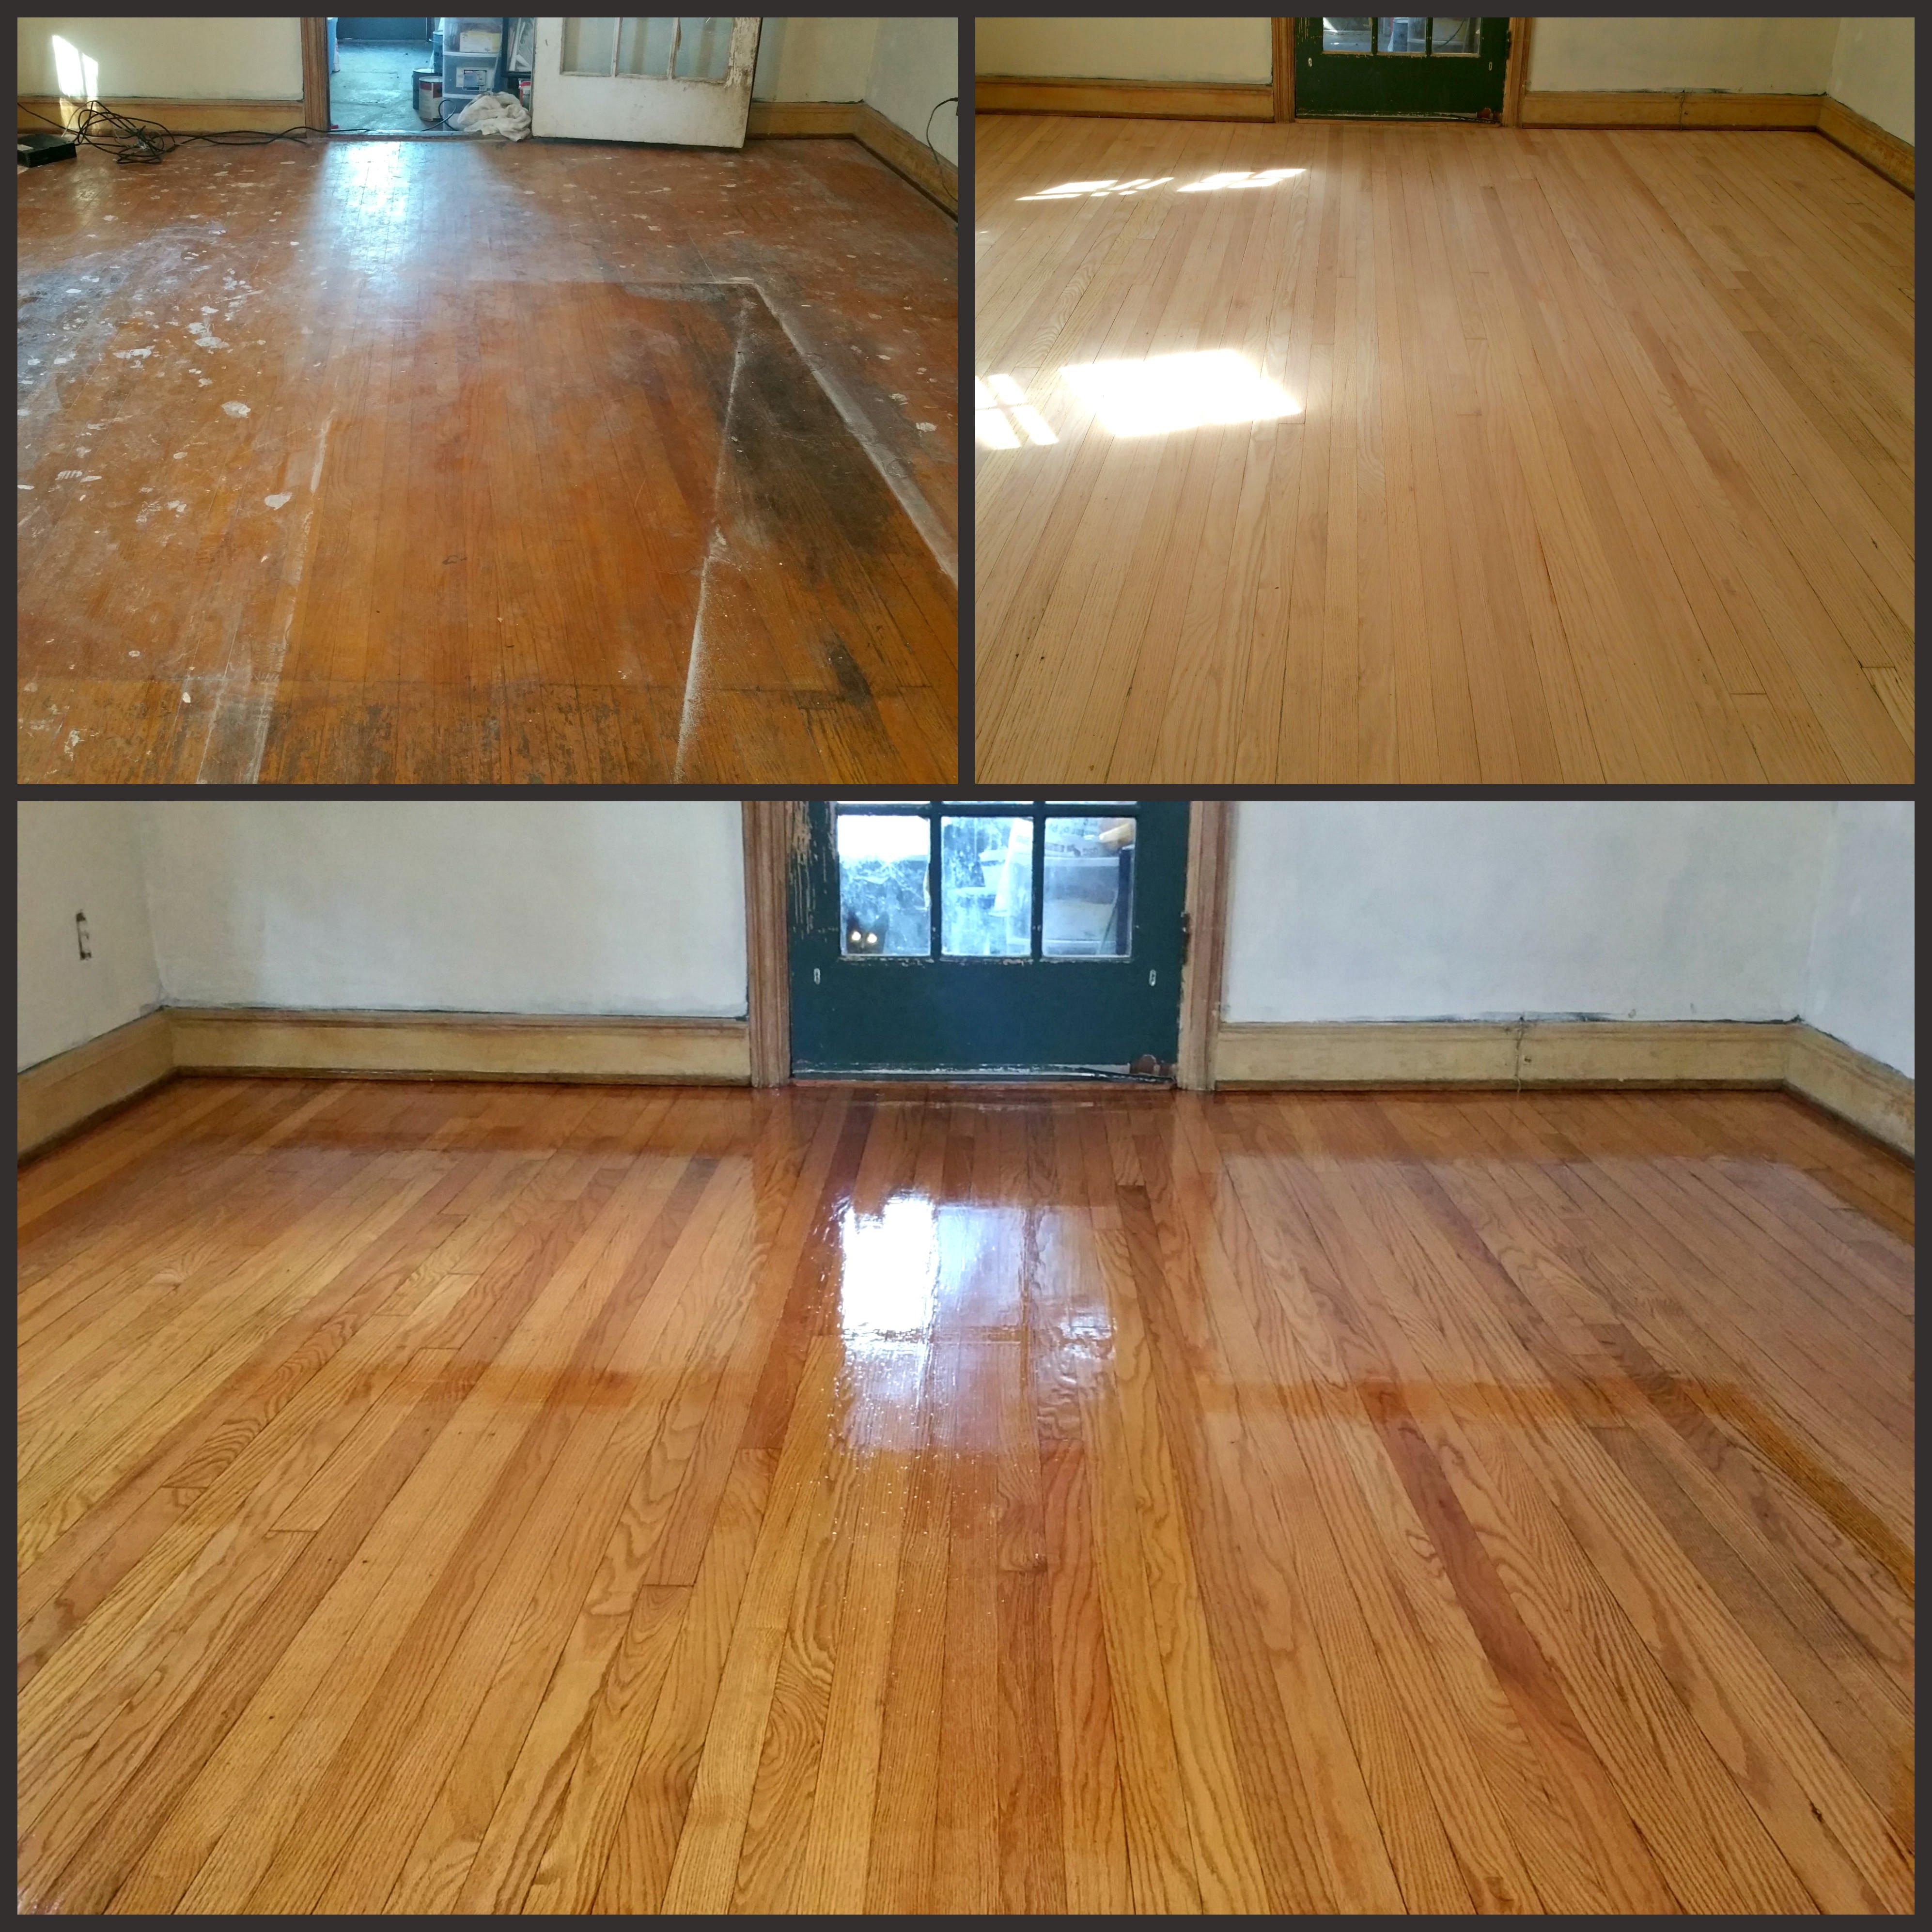 29 Lovable Hardwood Floor Refinishing and Installation 2022 free download hardwood floor refinishing and installation of floor refinishing company hardwood floors service by cris floor pertaining to floor refinishing company hardwood floors service by cris